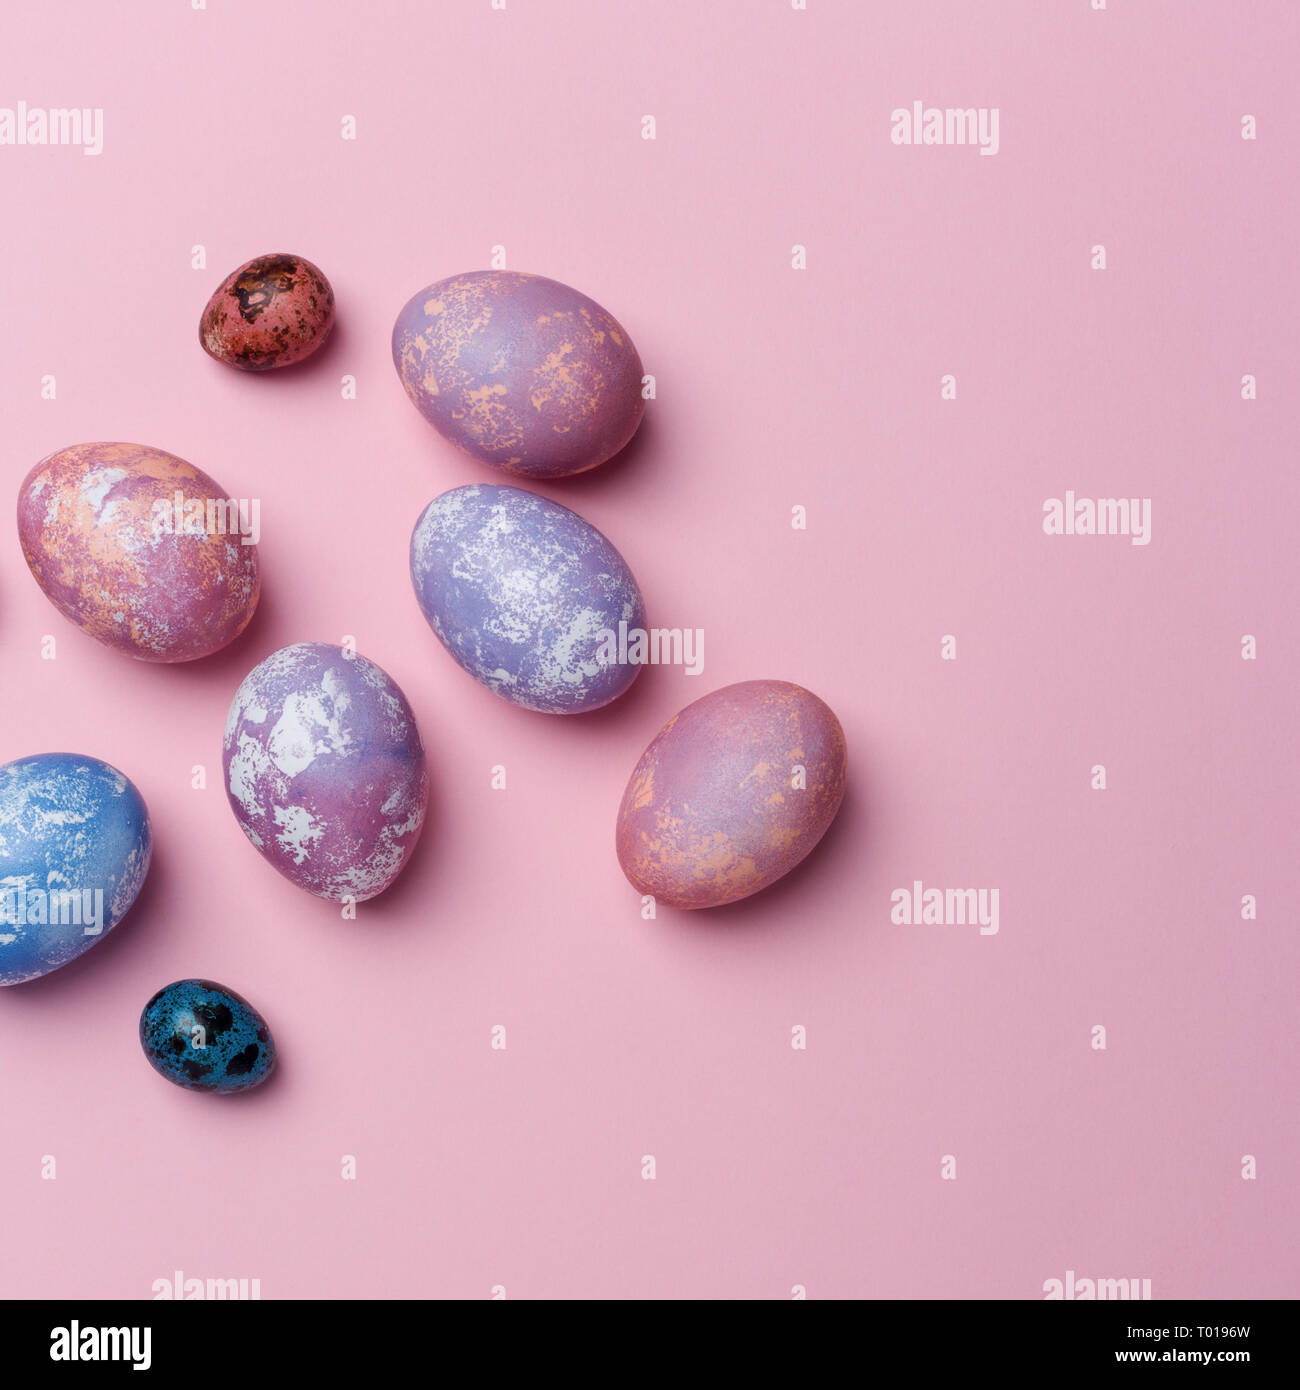 Multicolored eggs and quail eggs on pink background, copy space. Healthy food concept. Top view, flat lay. Easter eggs. Happy Easter concept Stock Photo